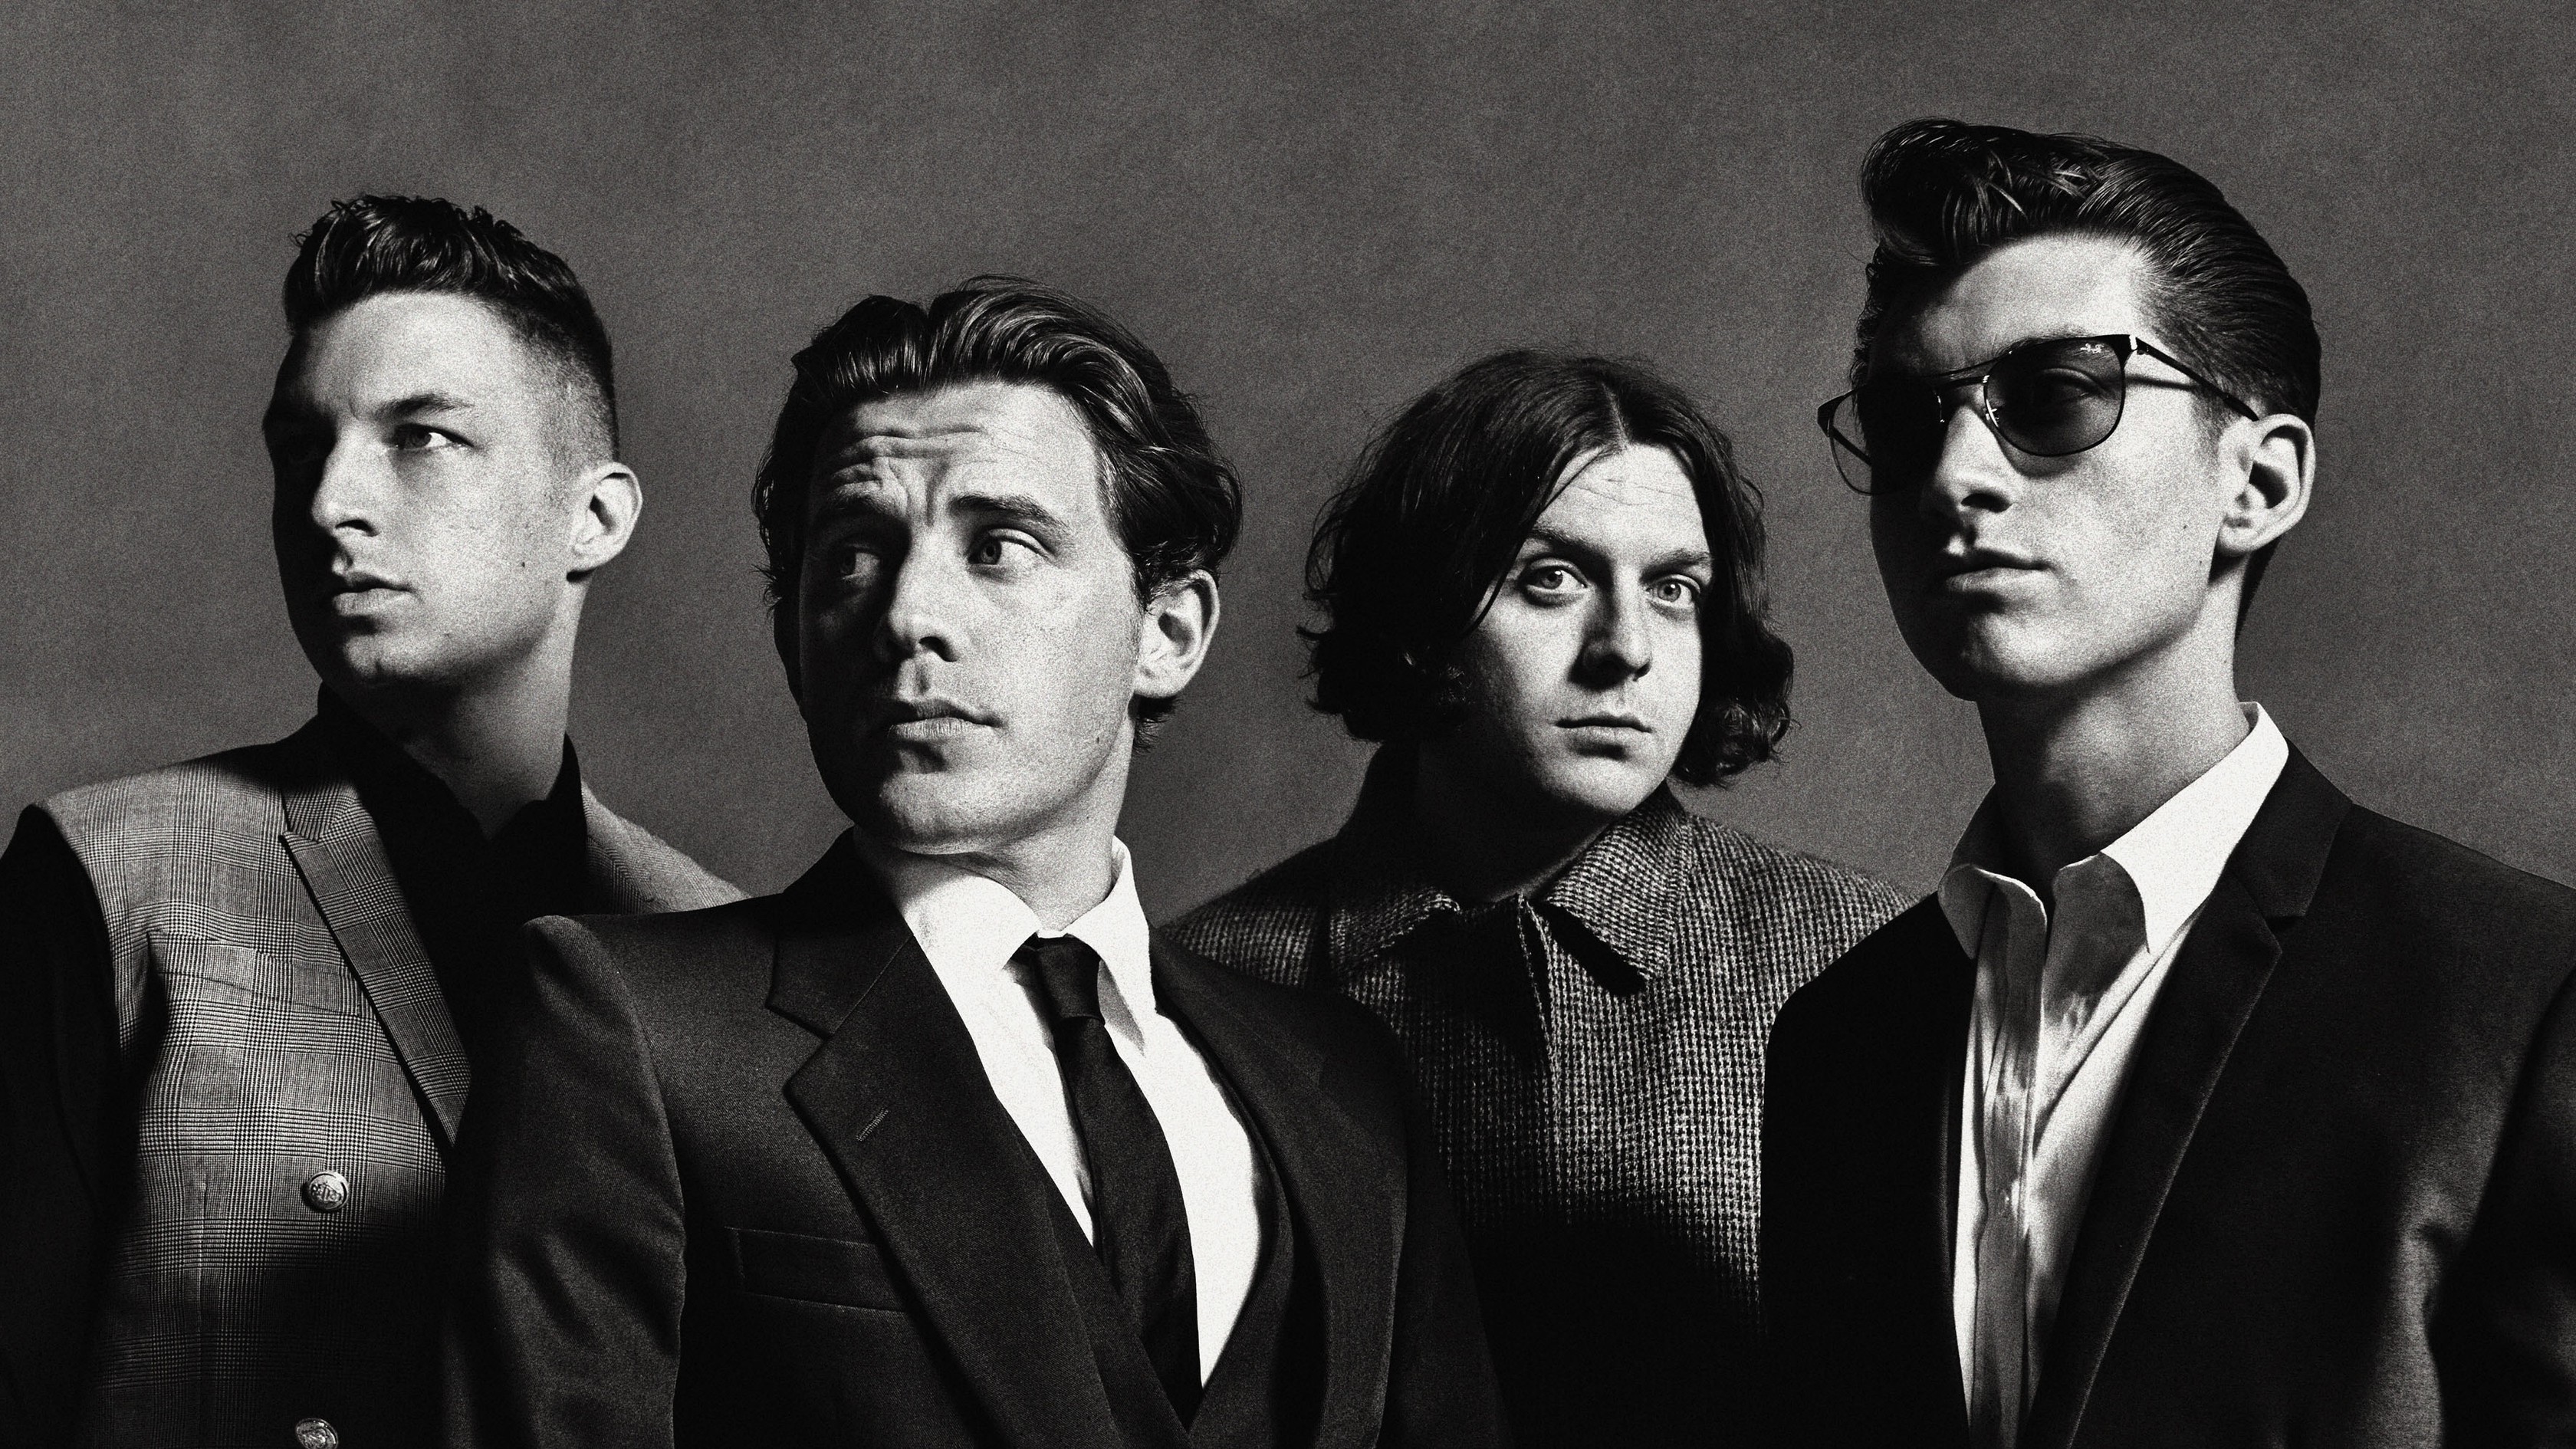 arctic monkeys wallpaper hd,classic,photography,suit,black and white,white collar worker